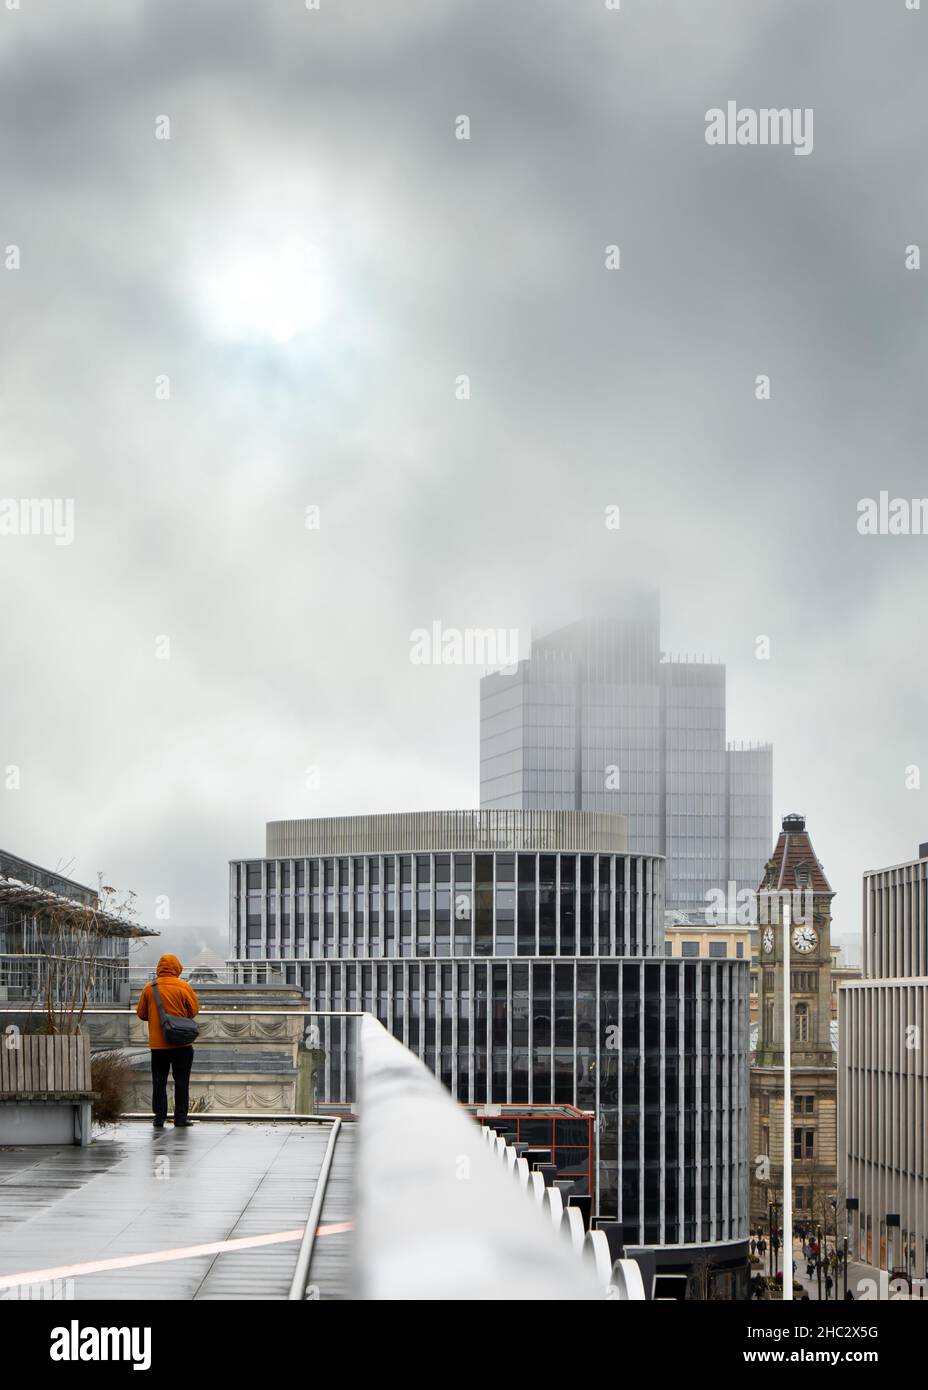 Anonymous man high up in bright coloured coat stood alone on rooftop looking out over view of city skyscrapers low cloud and stormy fog weather. Stock Photo